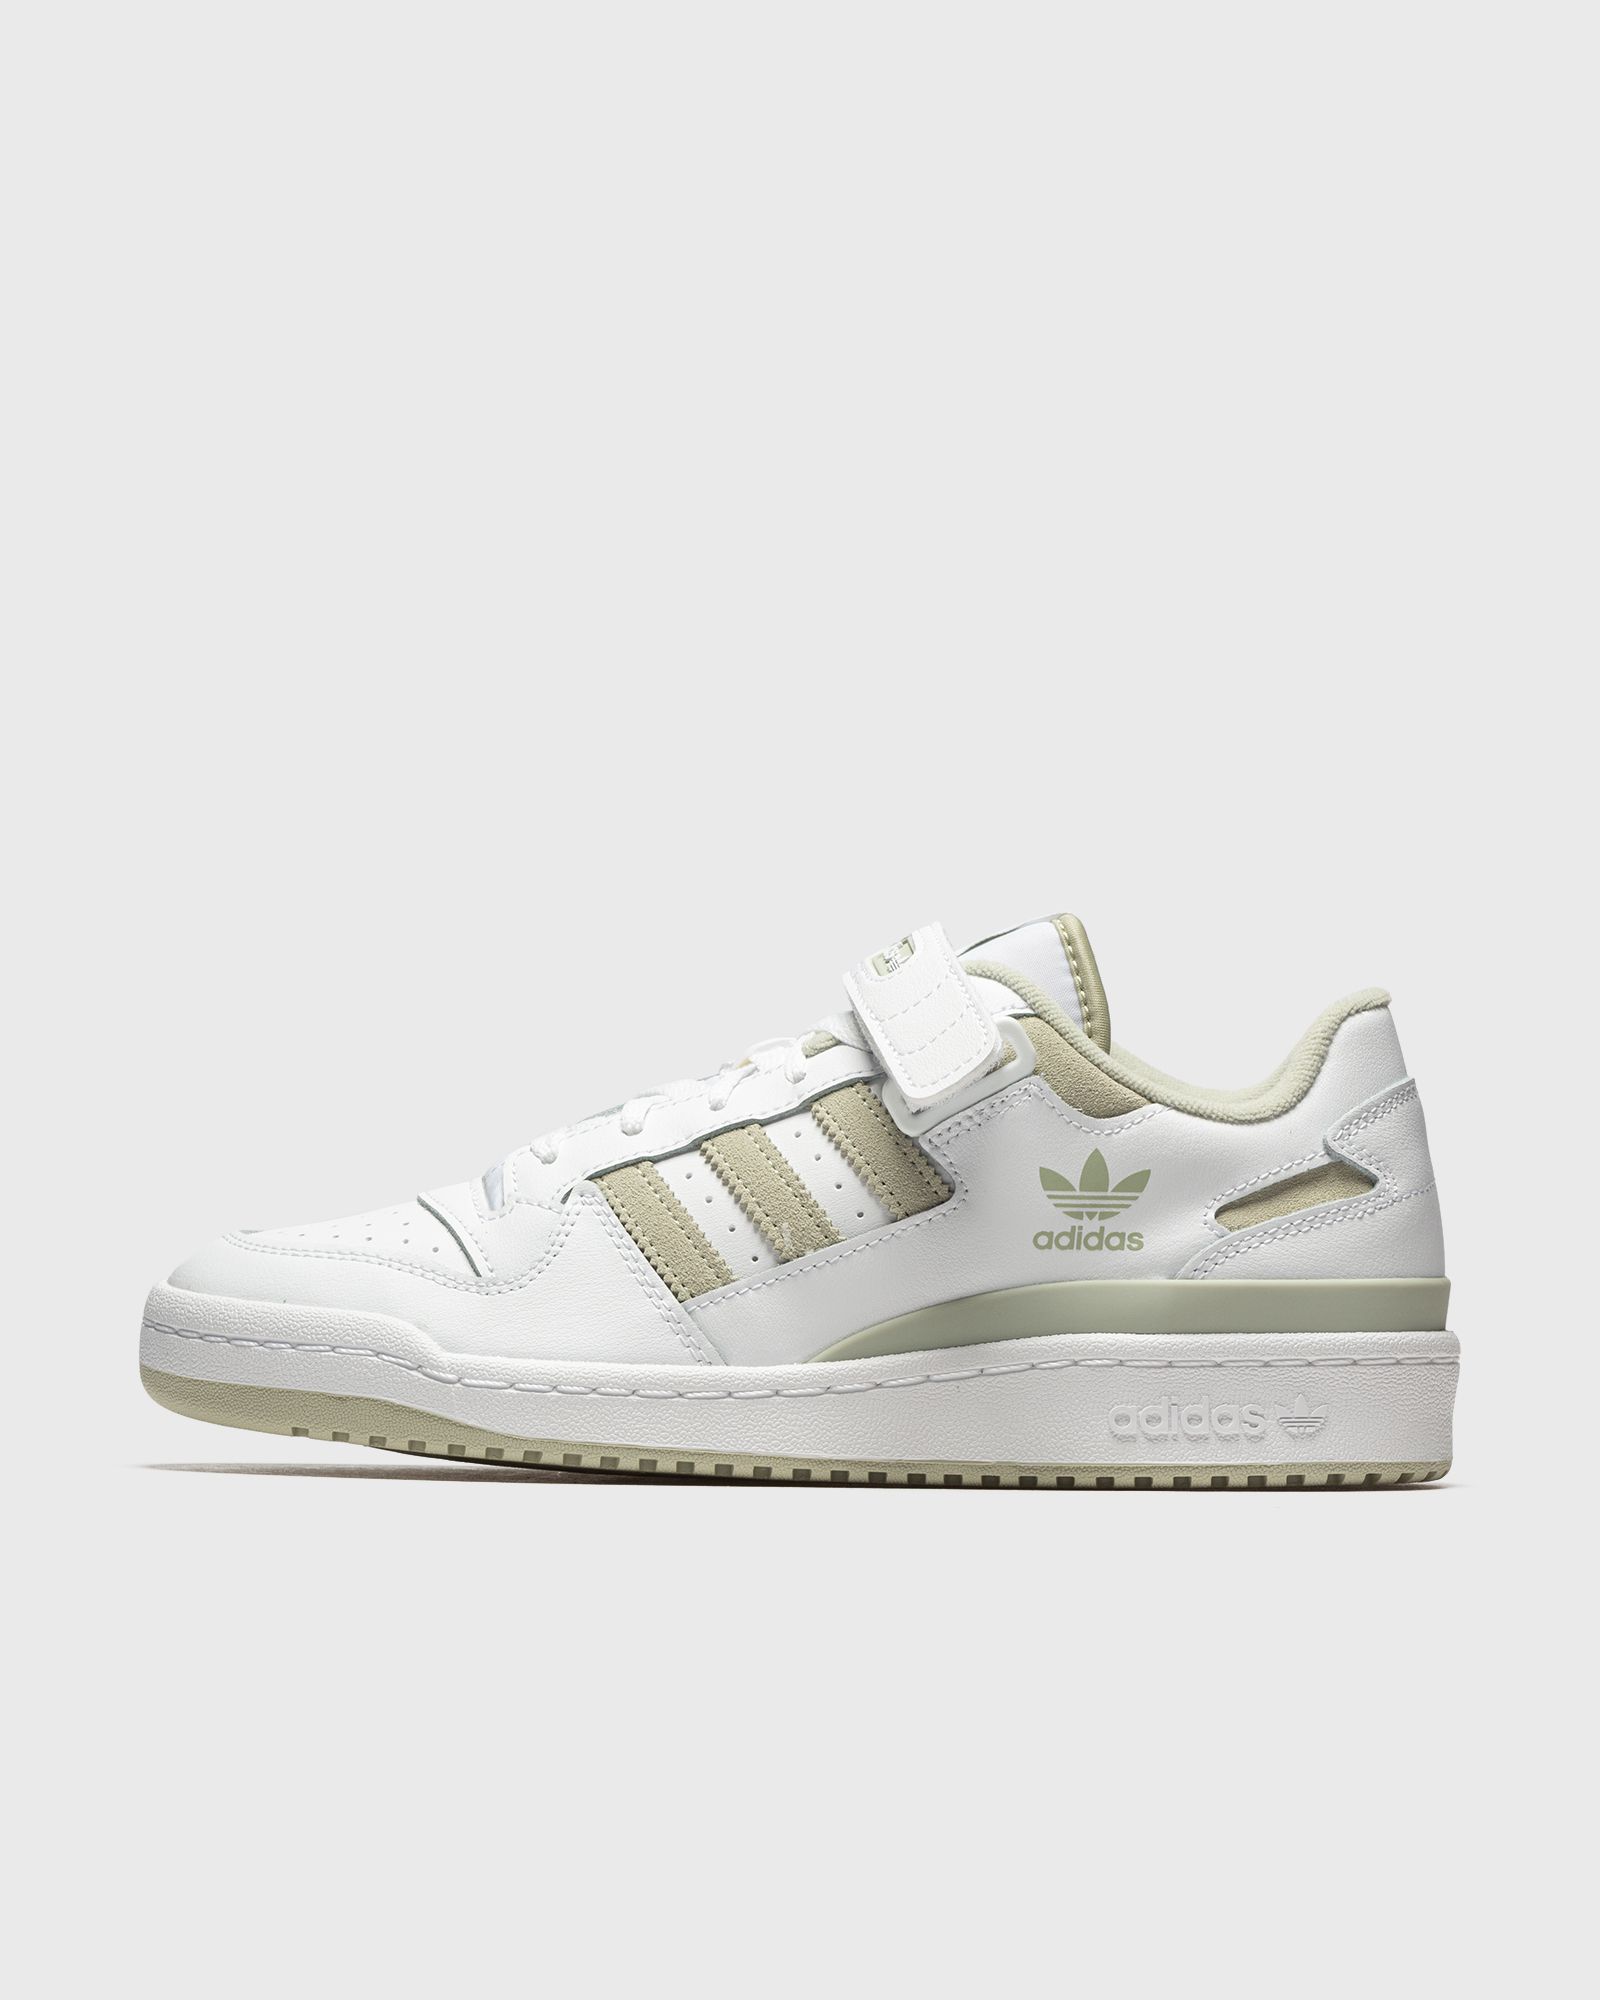 BSTN - for Adidas FORUM LOW FTWWHT/HALGRN/FTWWHT men,women Sneakers now available at BSTN size US 11,0 | AccuWeather Shop